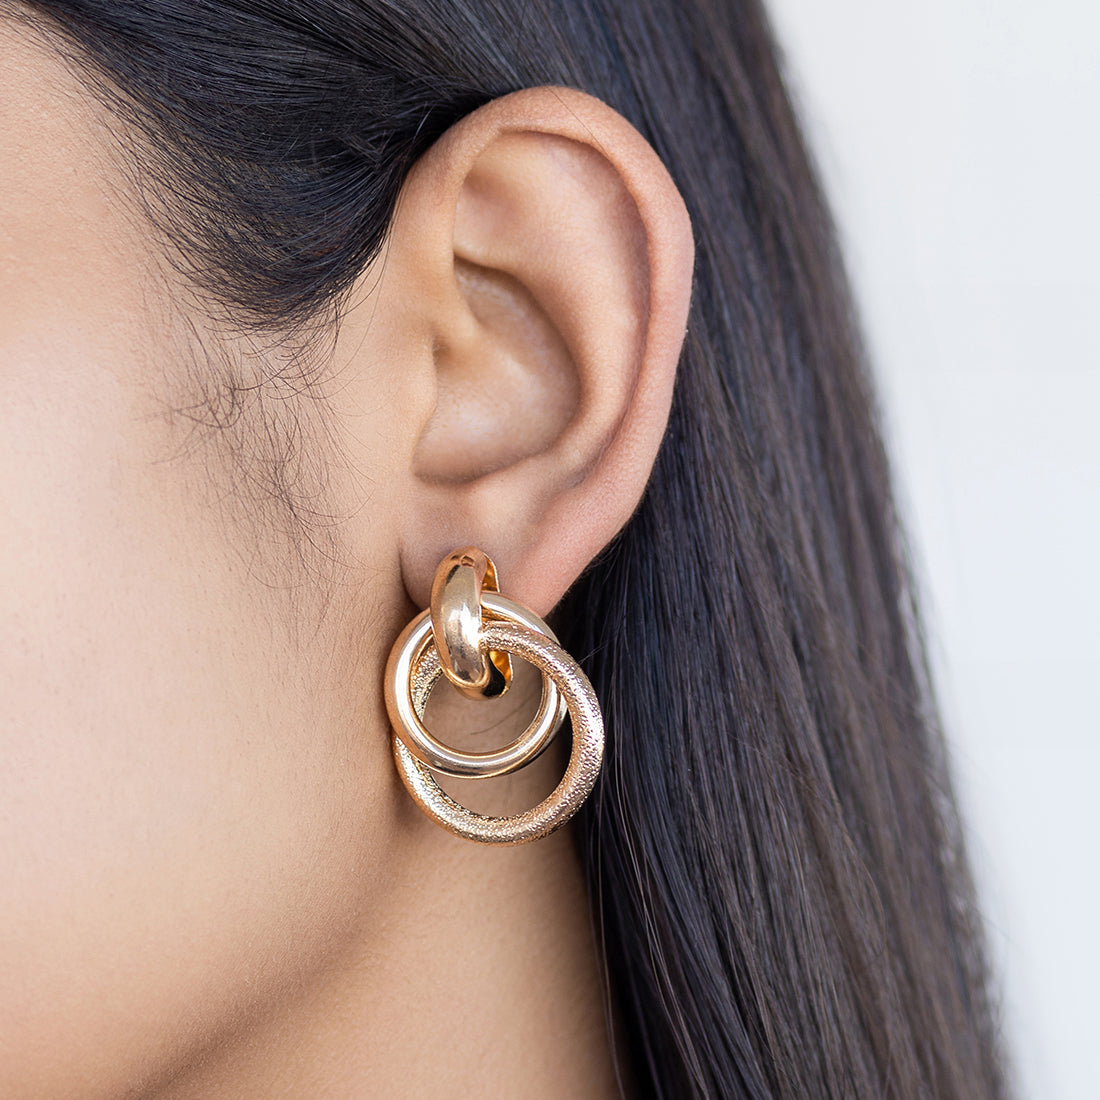 Contemporary Bold Gold-Toned Oversized Double Ciruclar Layered Stud Earrings